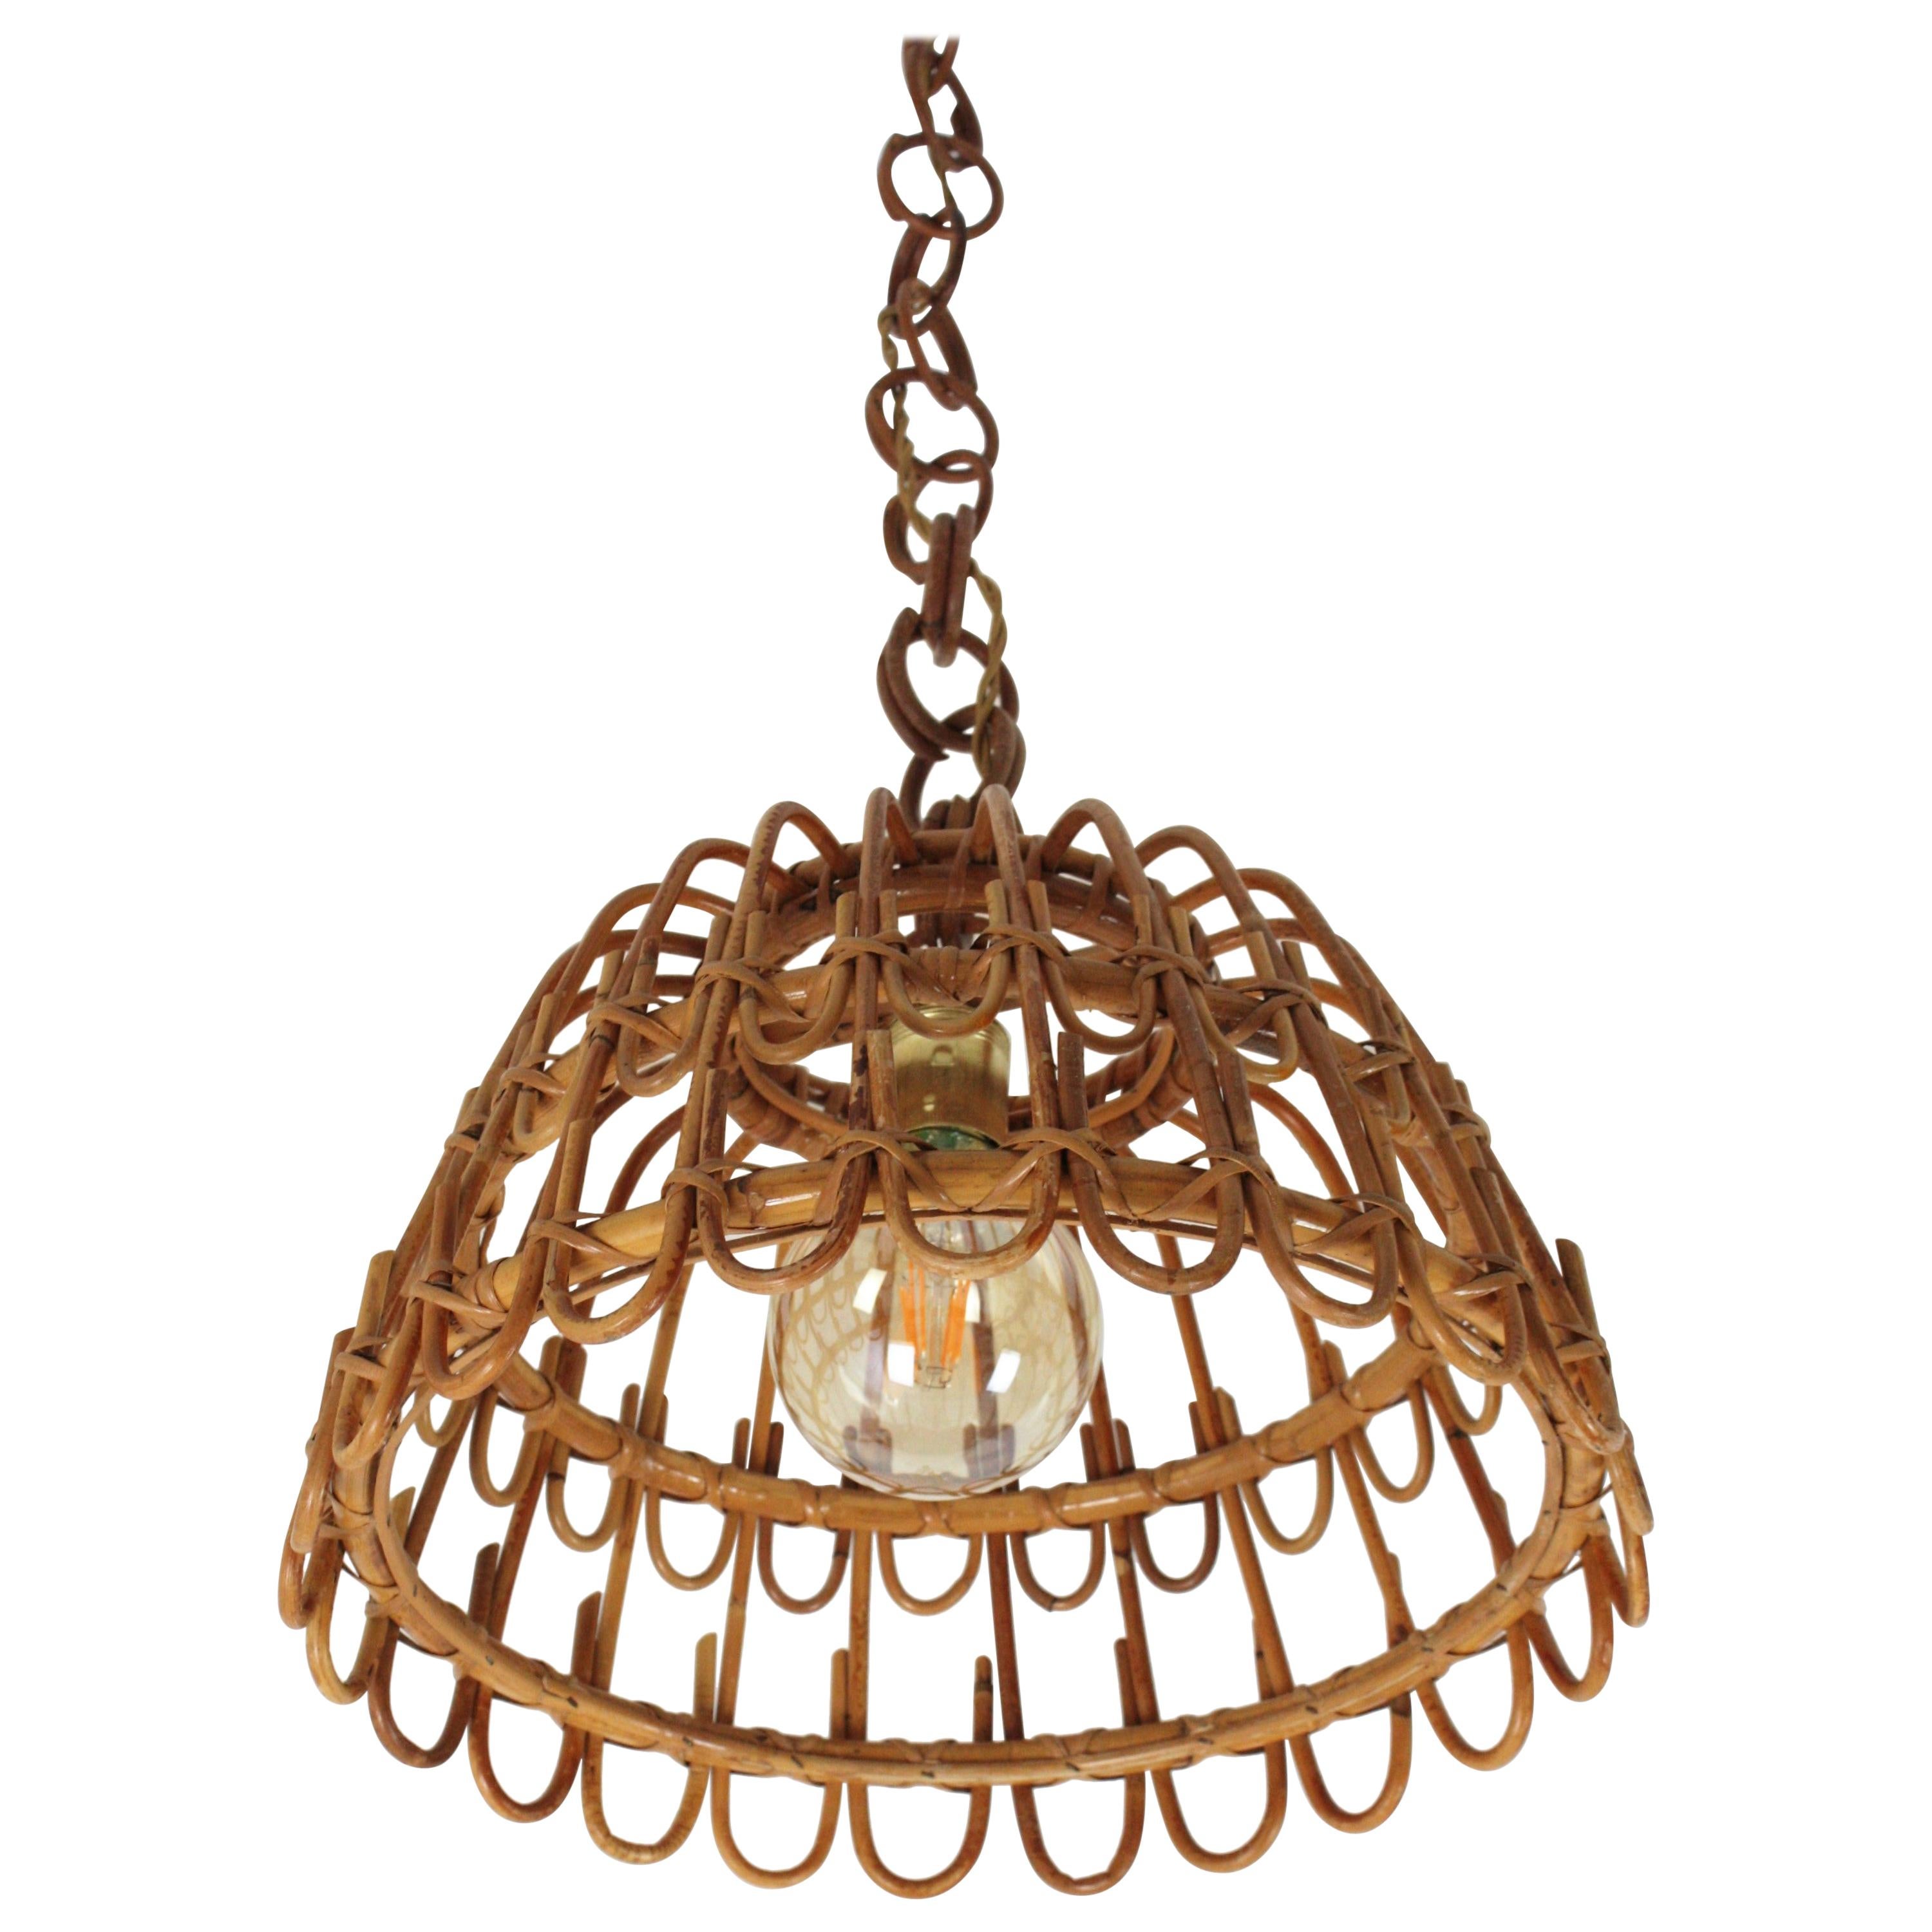 Eyecatching handcrafted rattan /wicker pendant light with geometric petal design. Spain, 1960s. 
This suspension lamp hangs from a rattan / bamboo chain that can be adjusted removing some links to the desired height.
This lamp will add a fresh